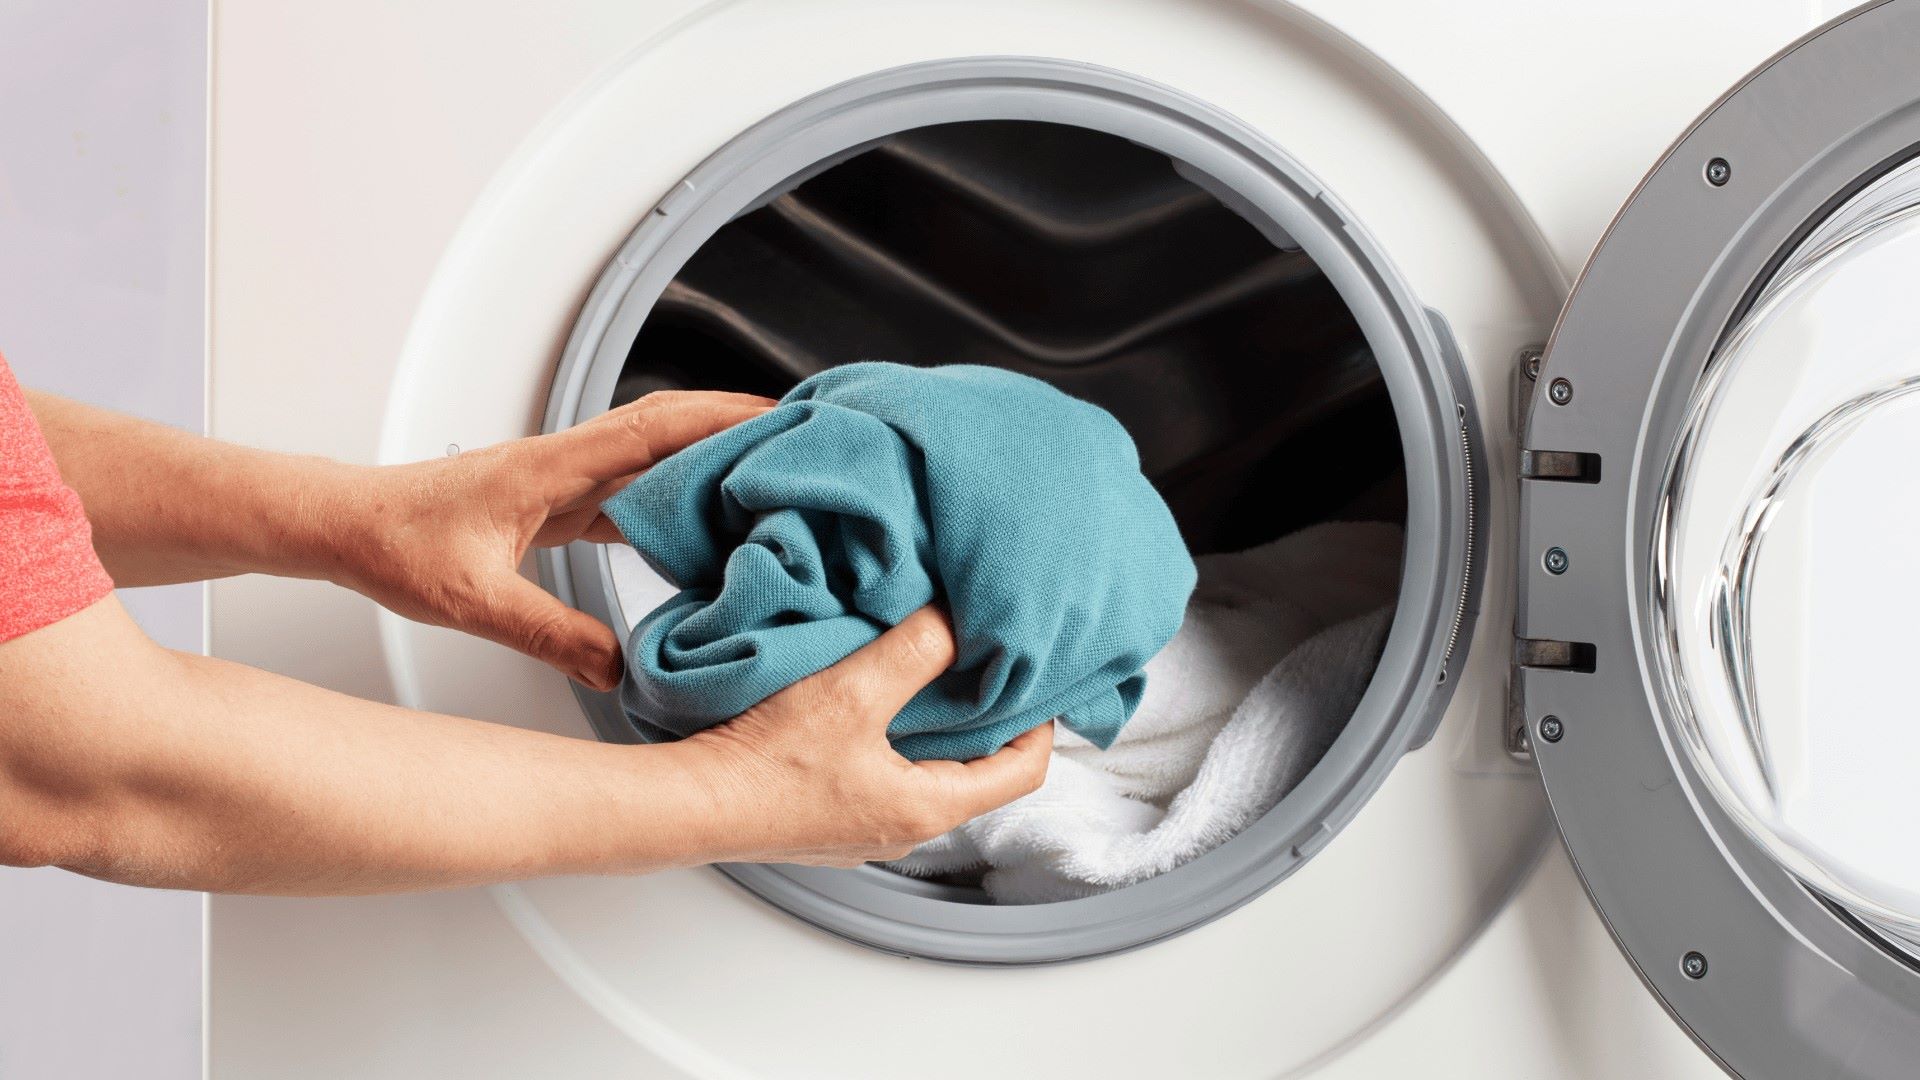 10-facts-about-national-laundry-day-april-15th